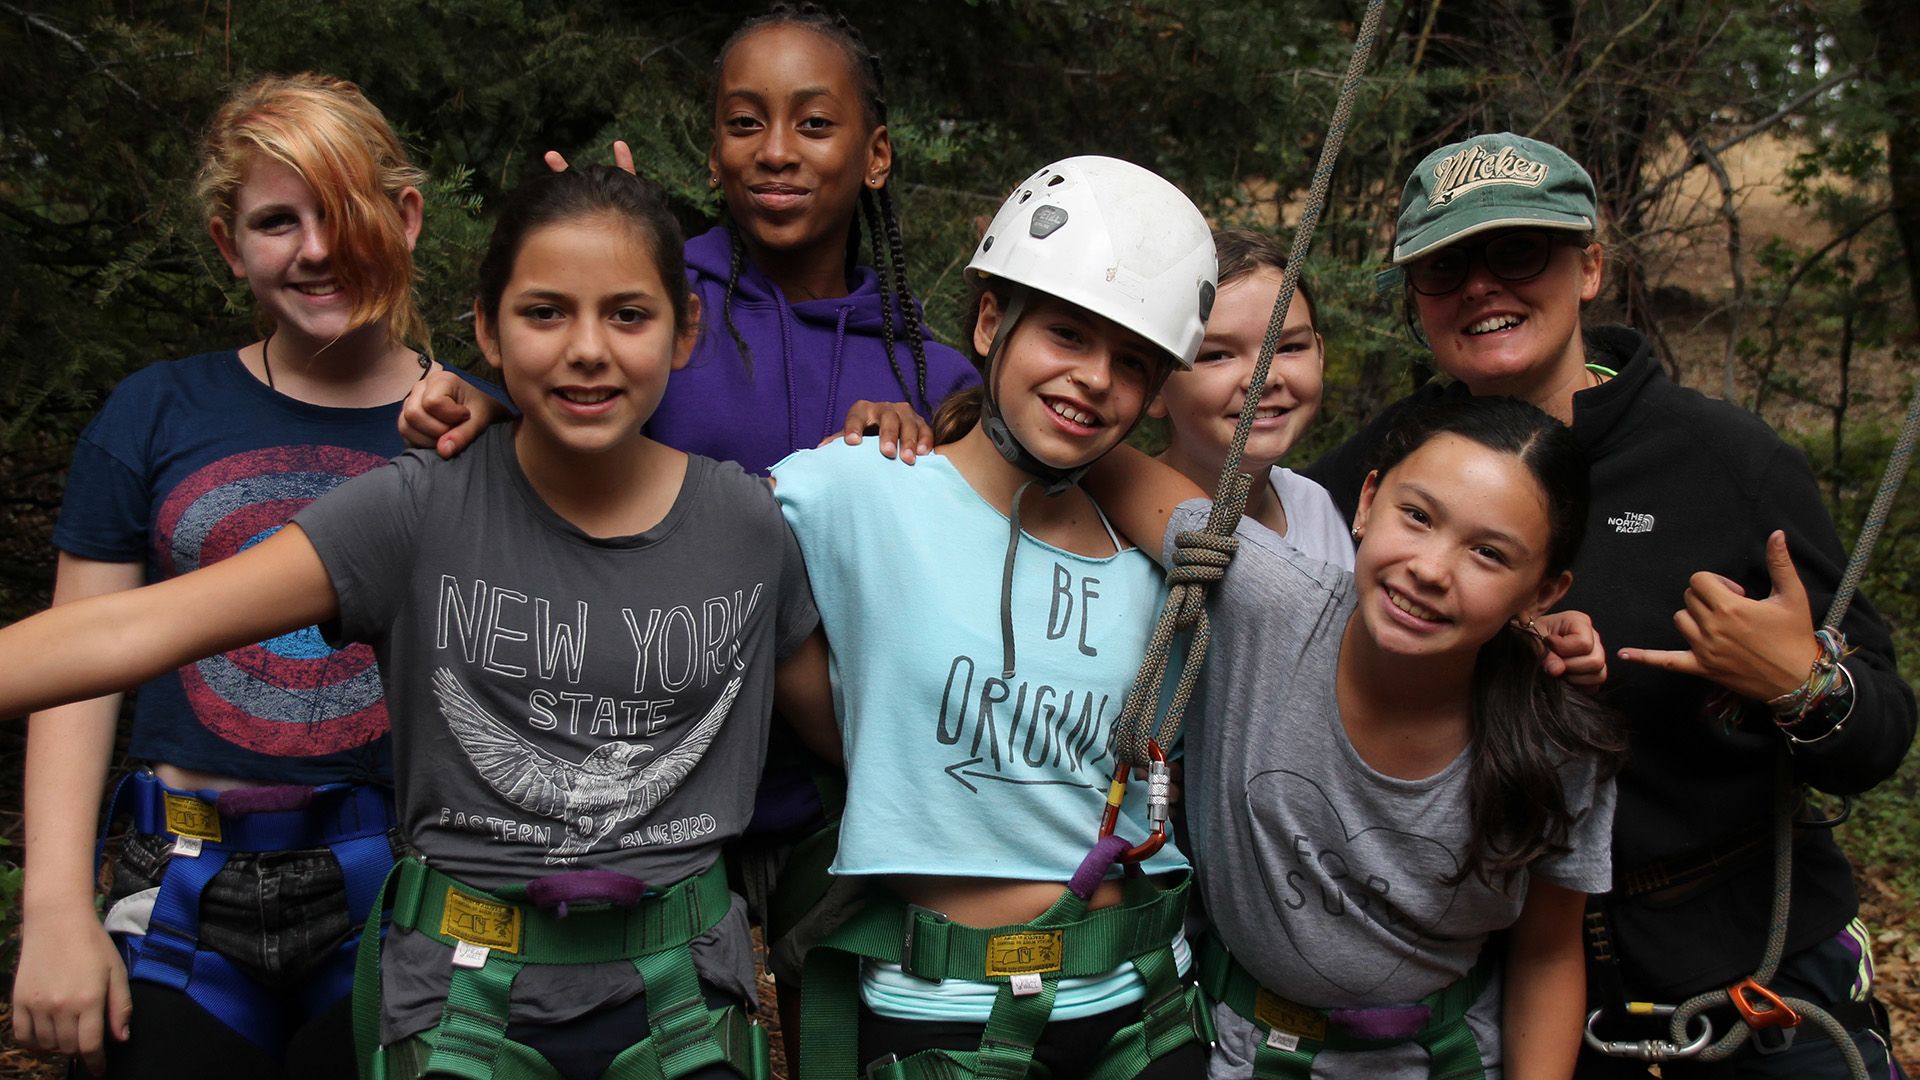 Best experience gifts for kids: Enroll them in a summer camp, like Pali Adventures Girl Power camp.